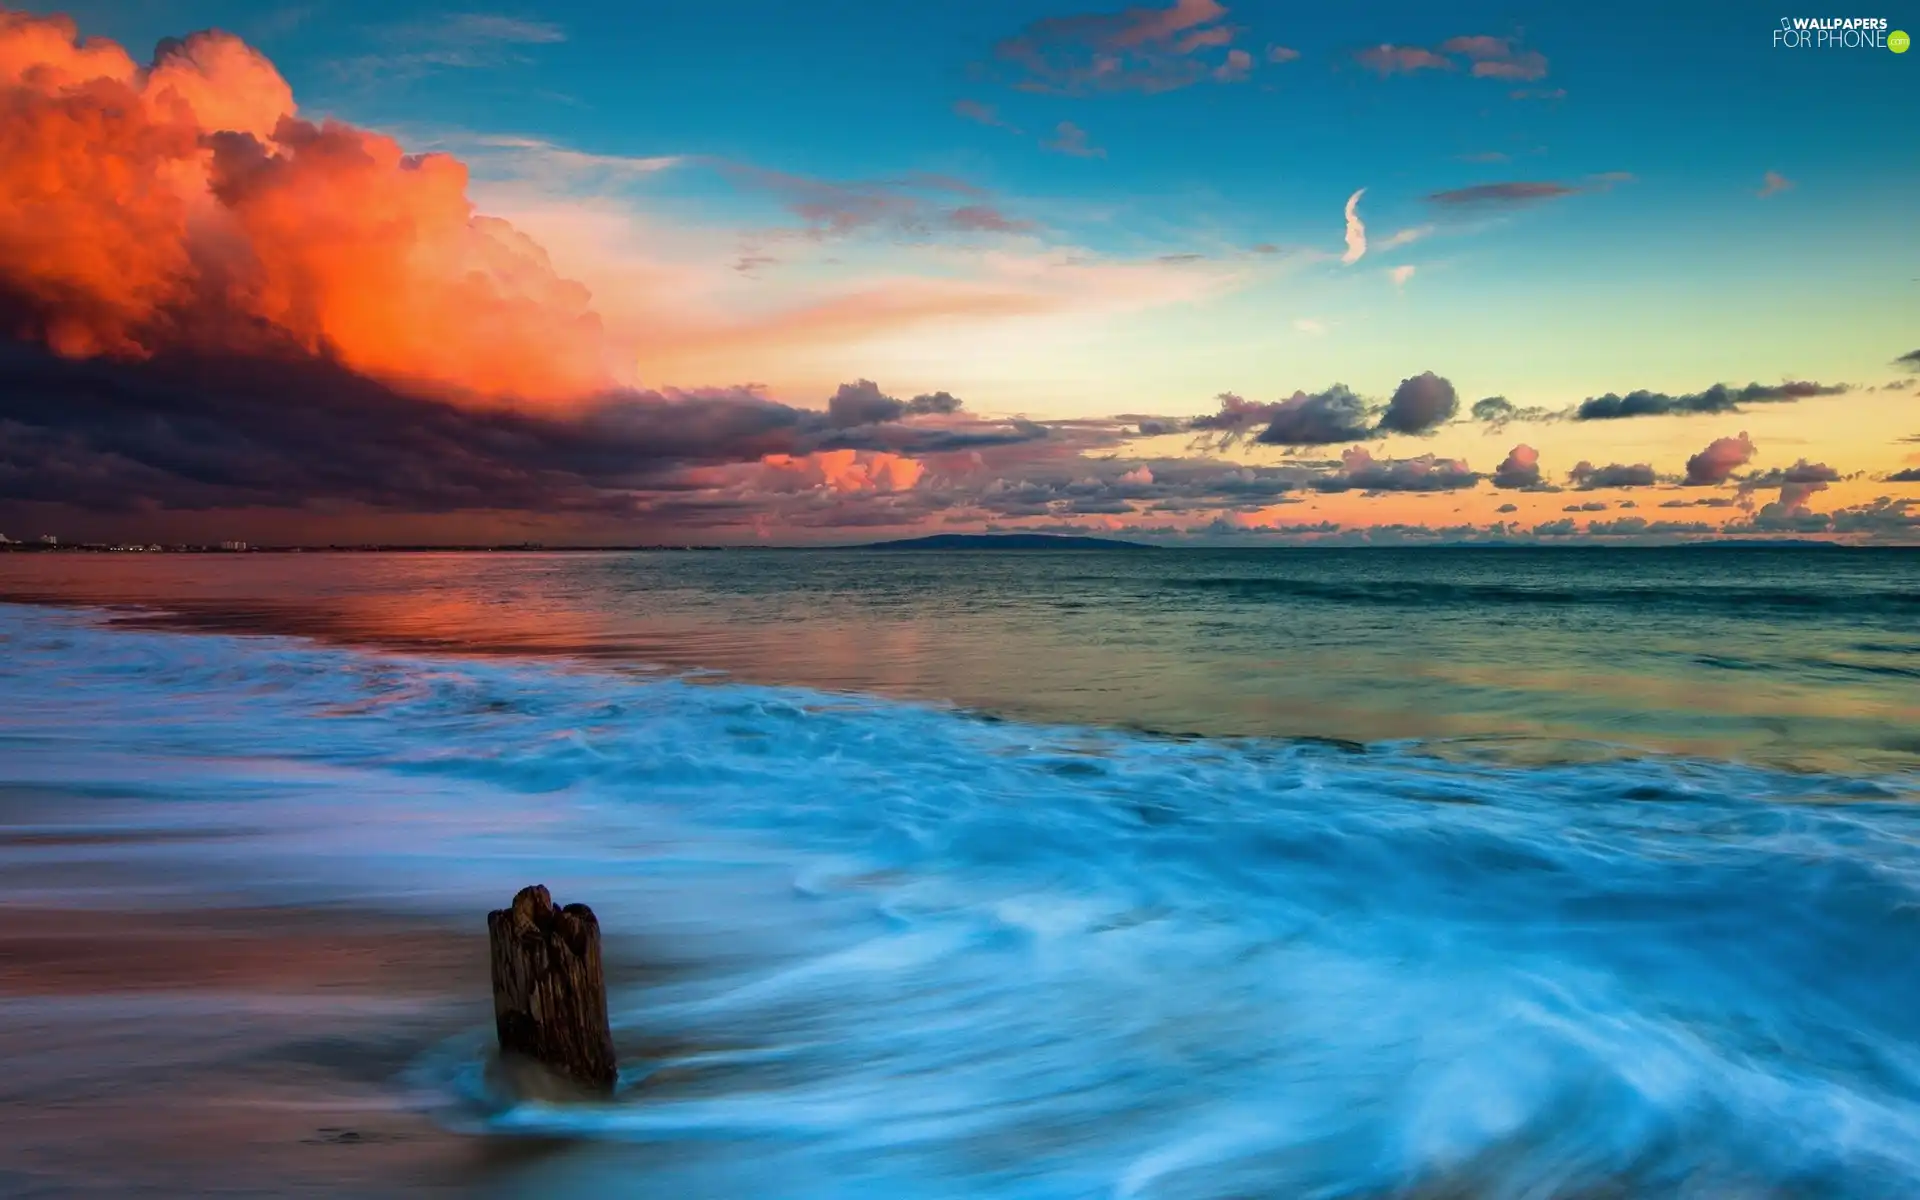 Great Sunsets, sea, clouds